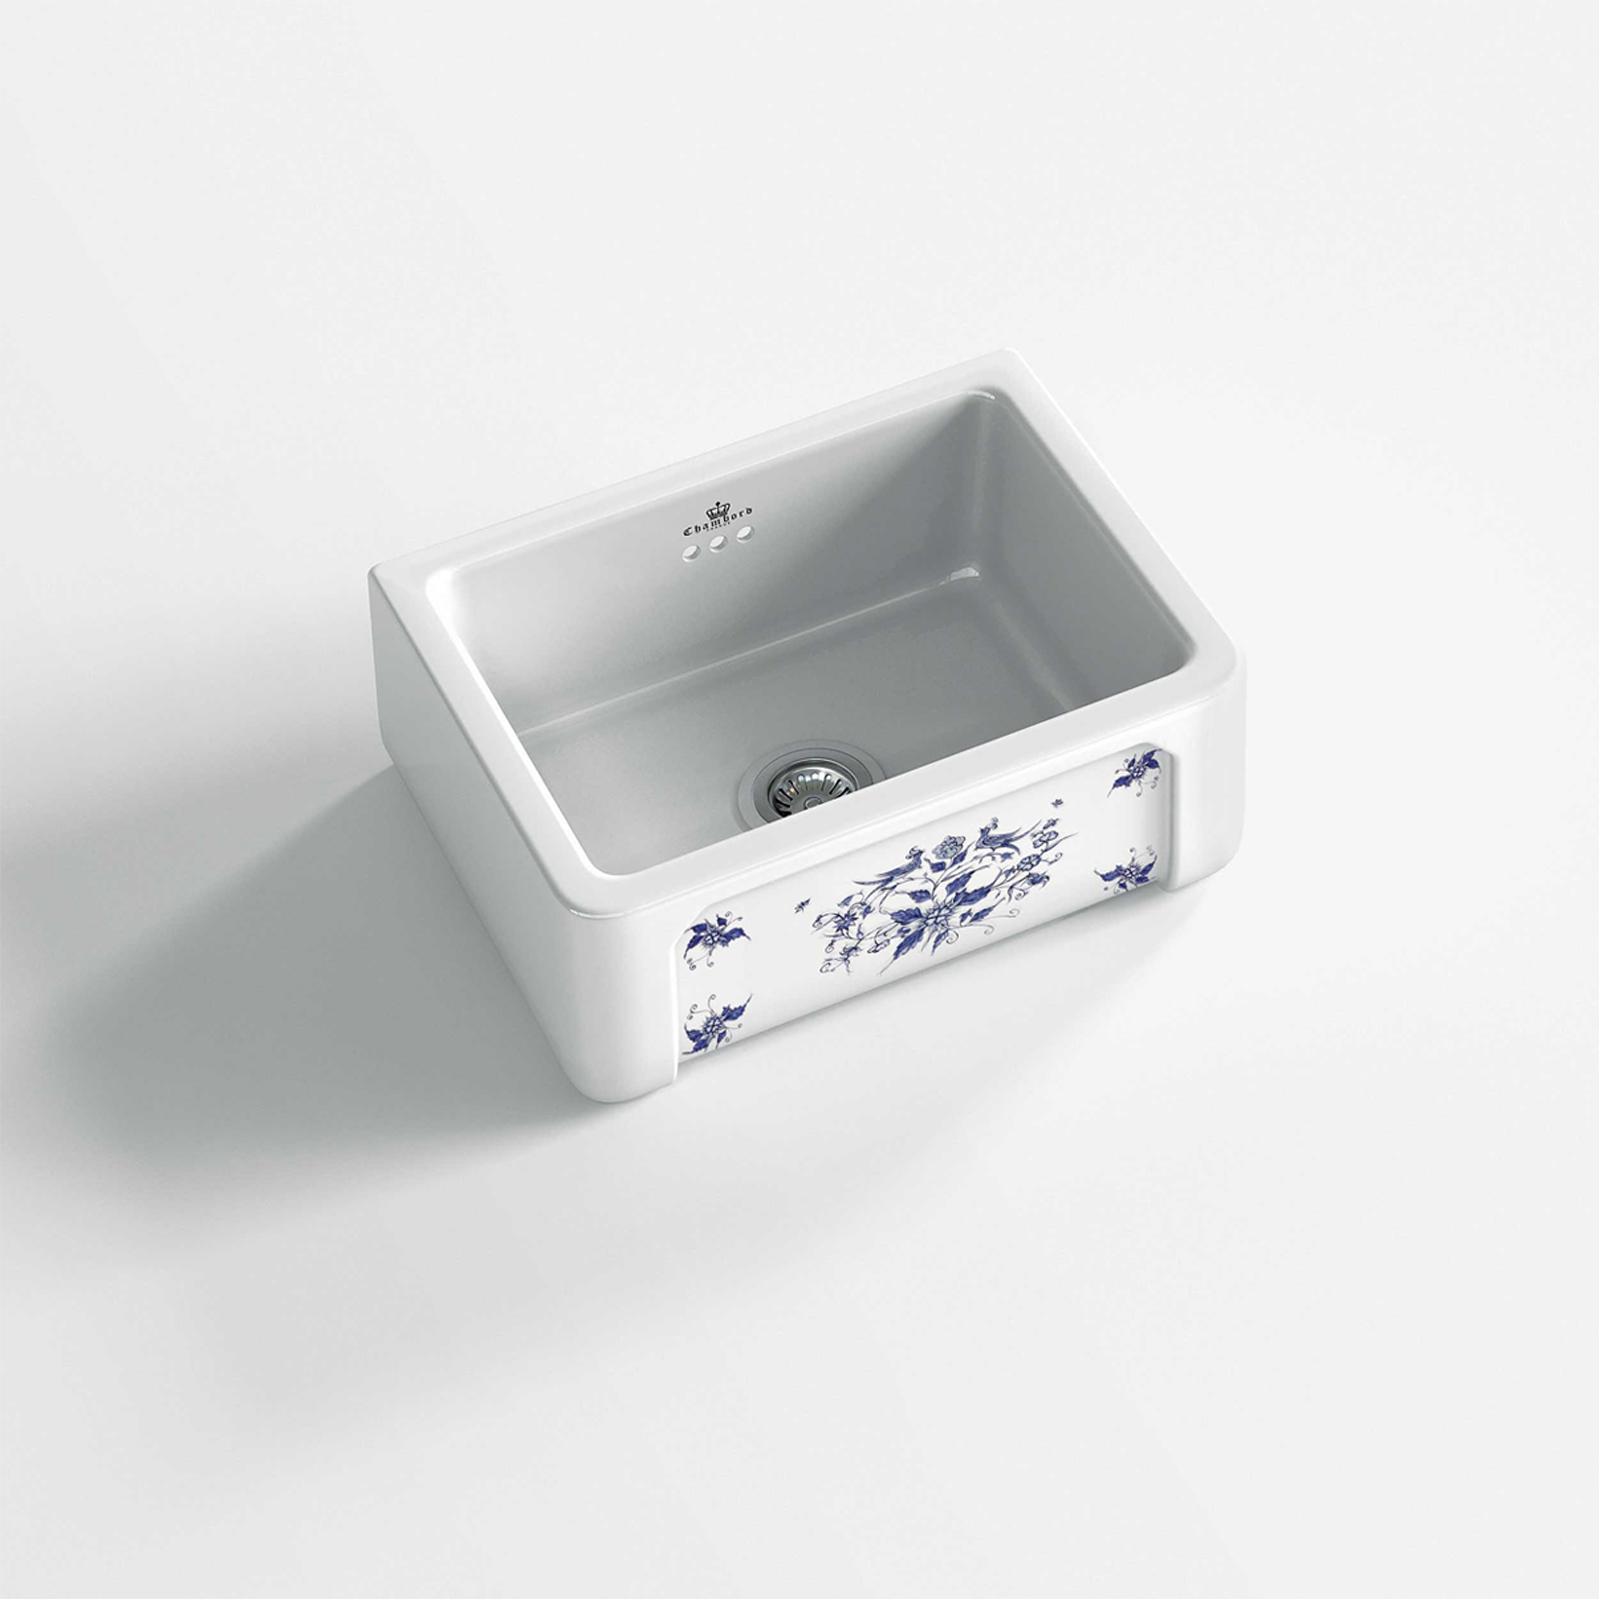 High-quality sink Henri I Moustiers - single bowl, decorated ceramic